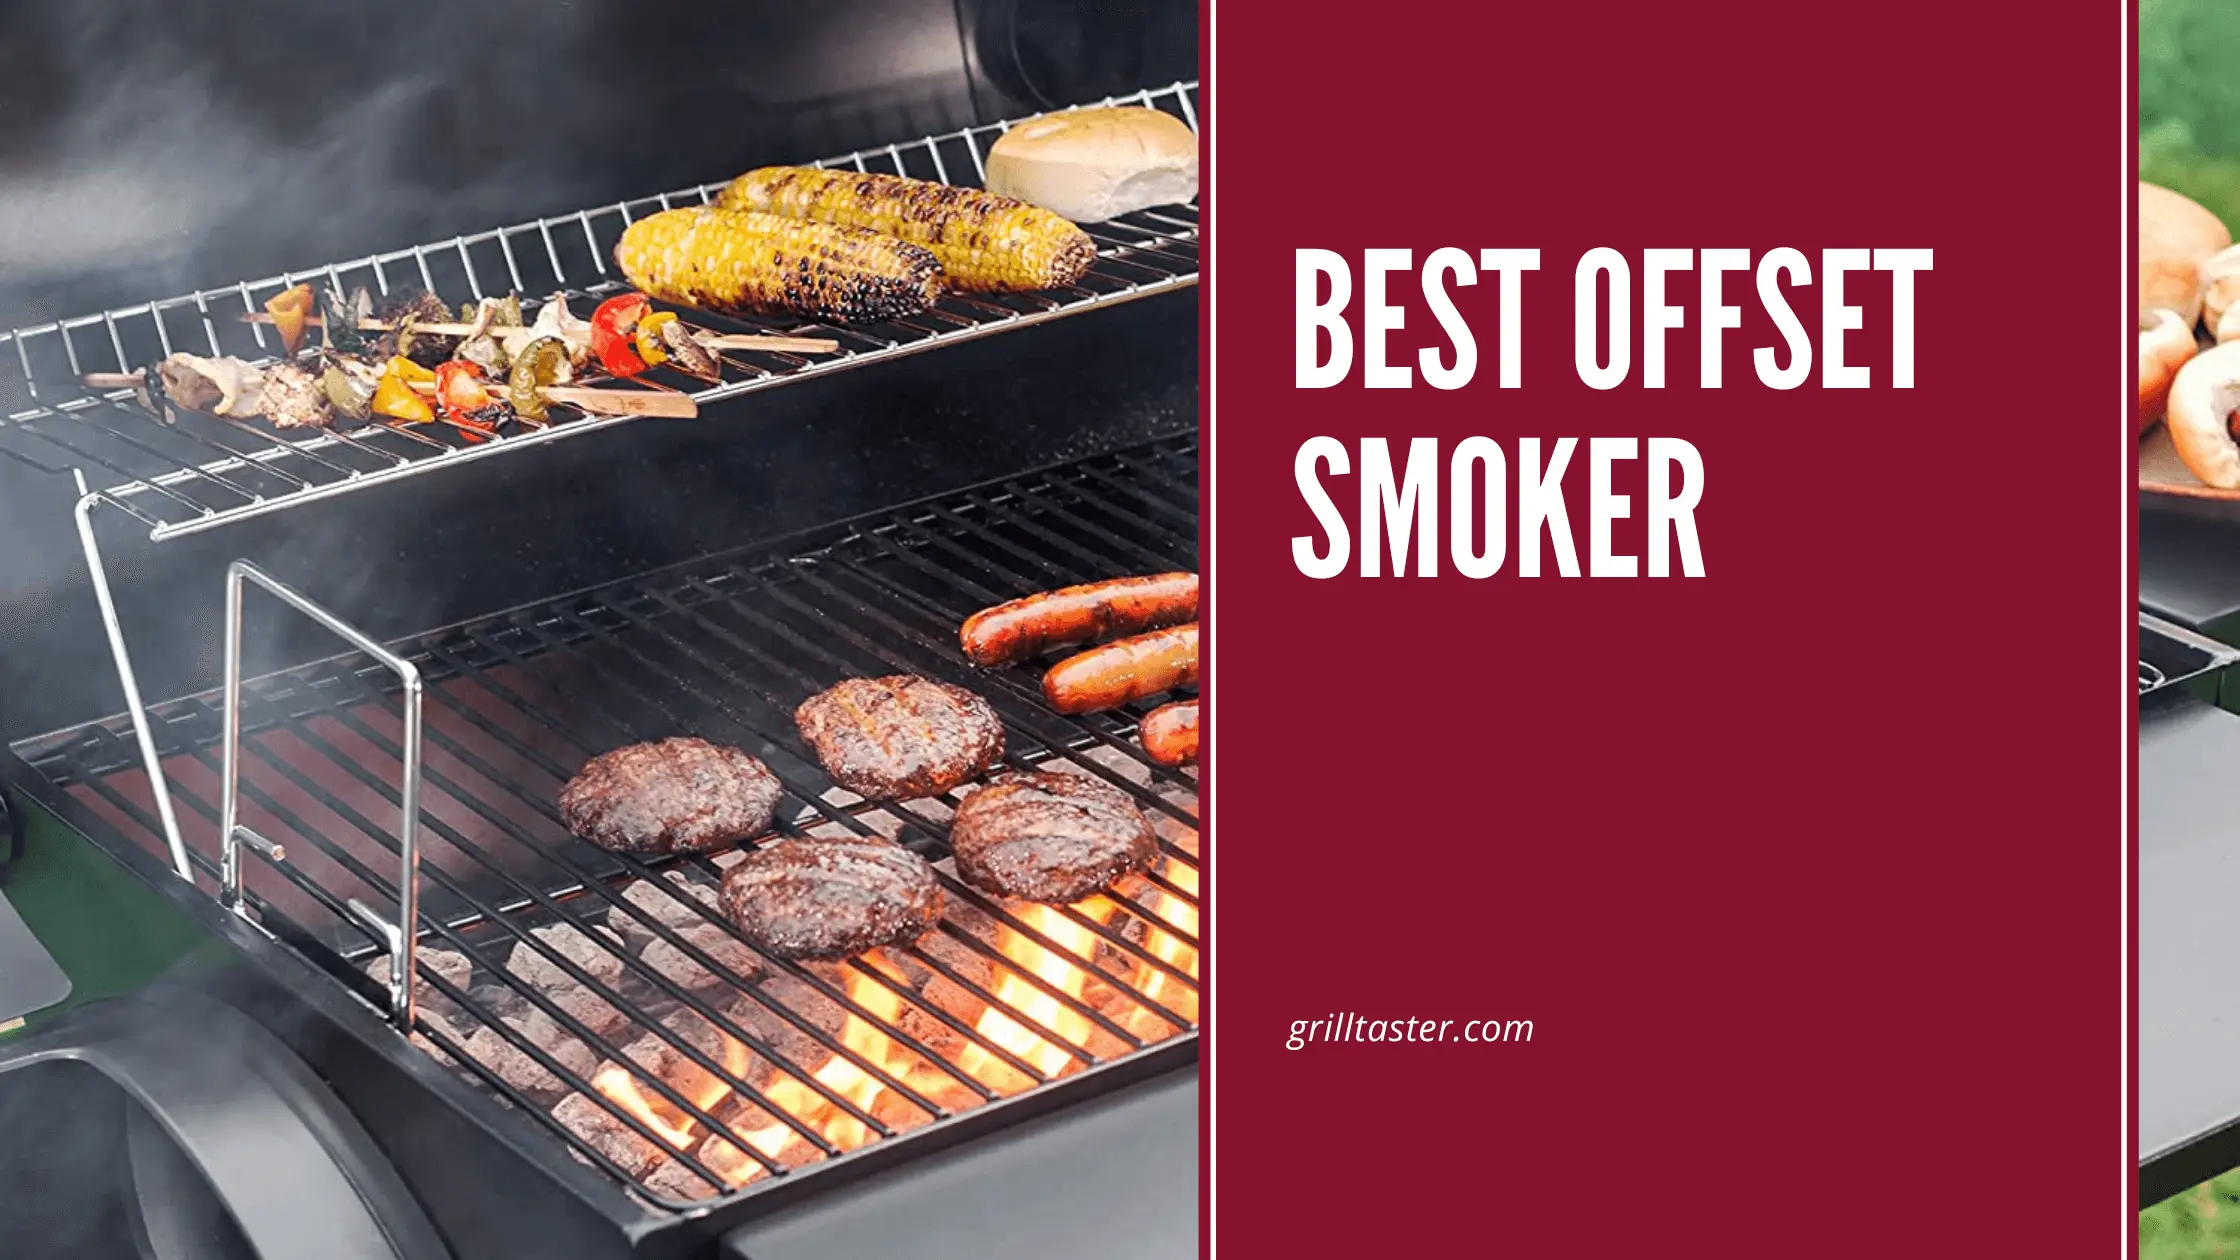 13 Best Offset Smoker In 2023 (Reviews By Experts)